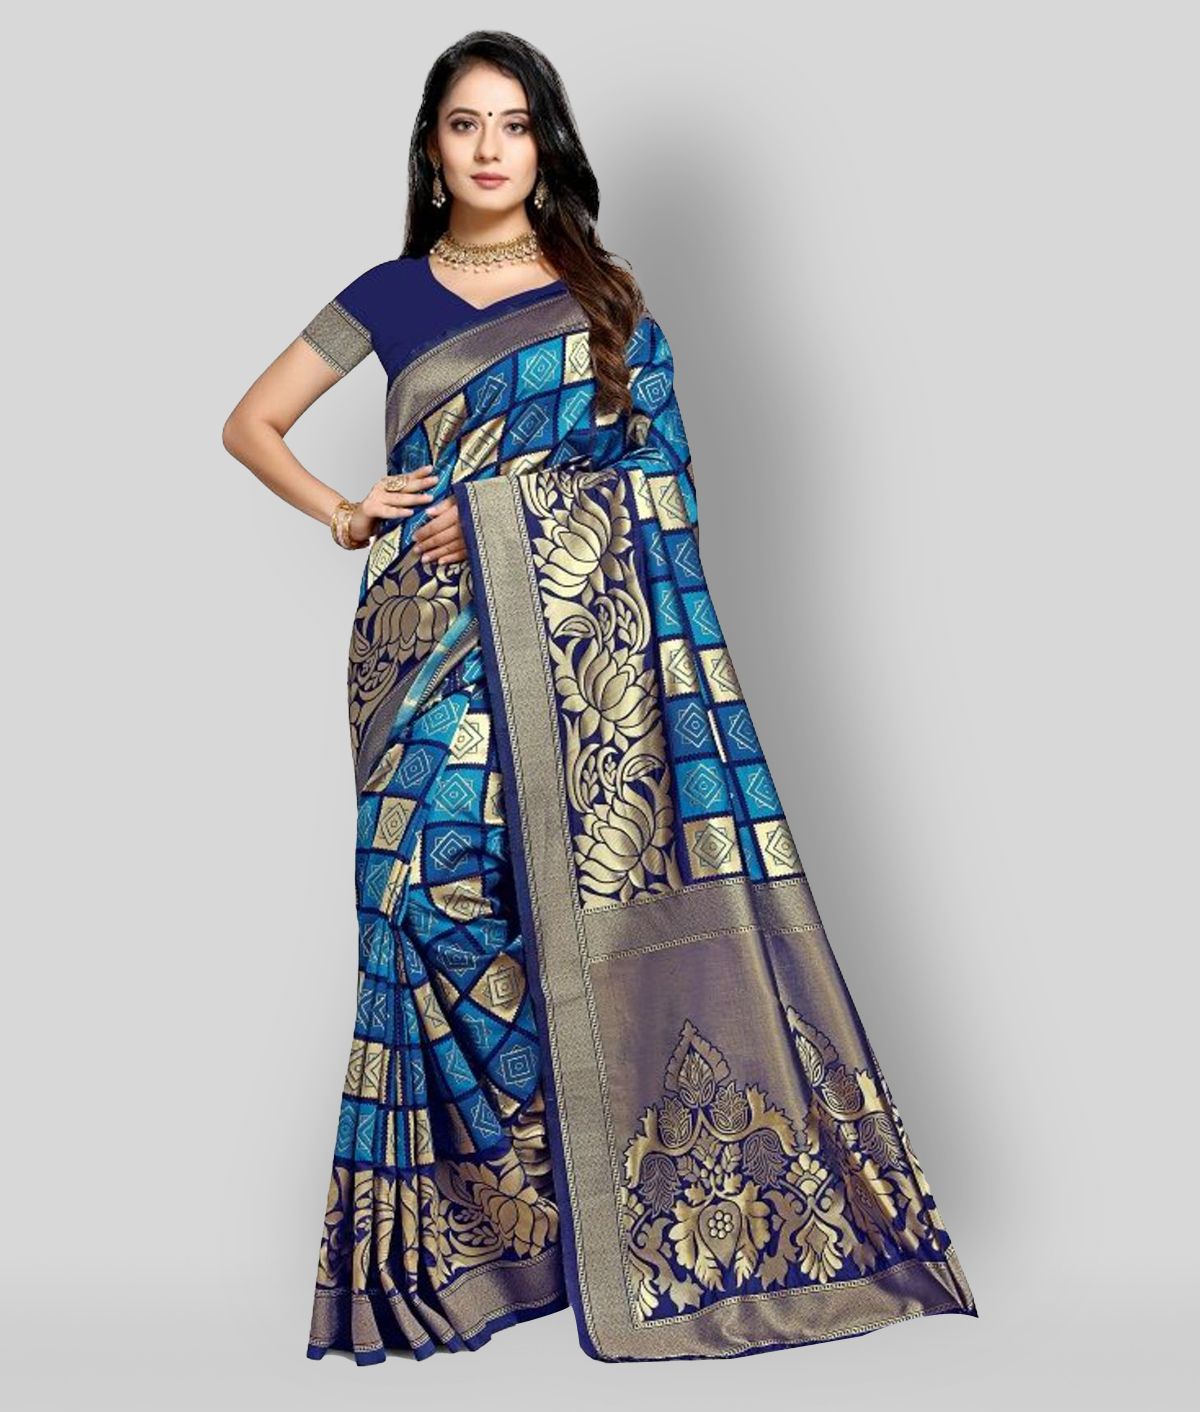     			NENCY FASHION - Multicolor Silk Blend Saree With Blouse Piece (Pack of 1)